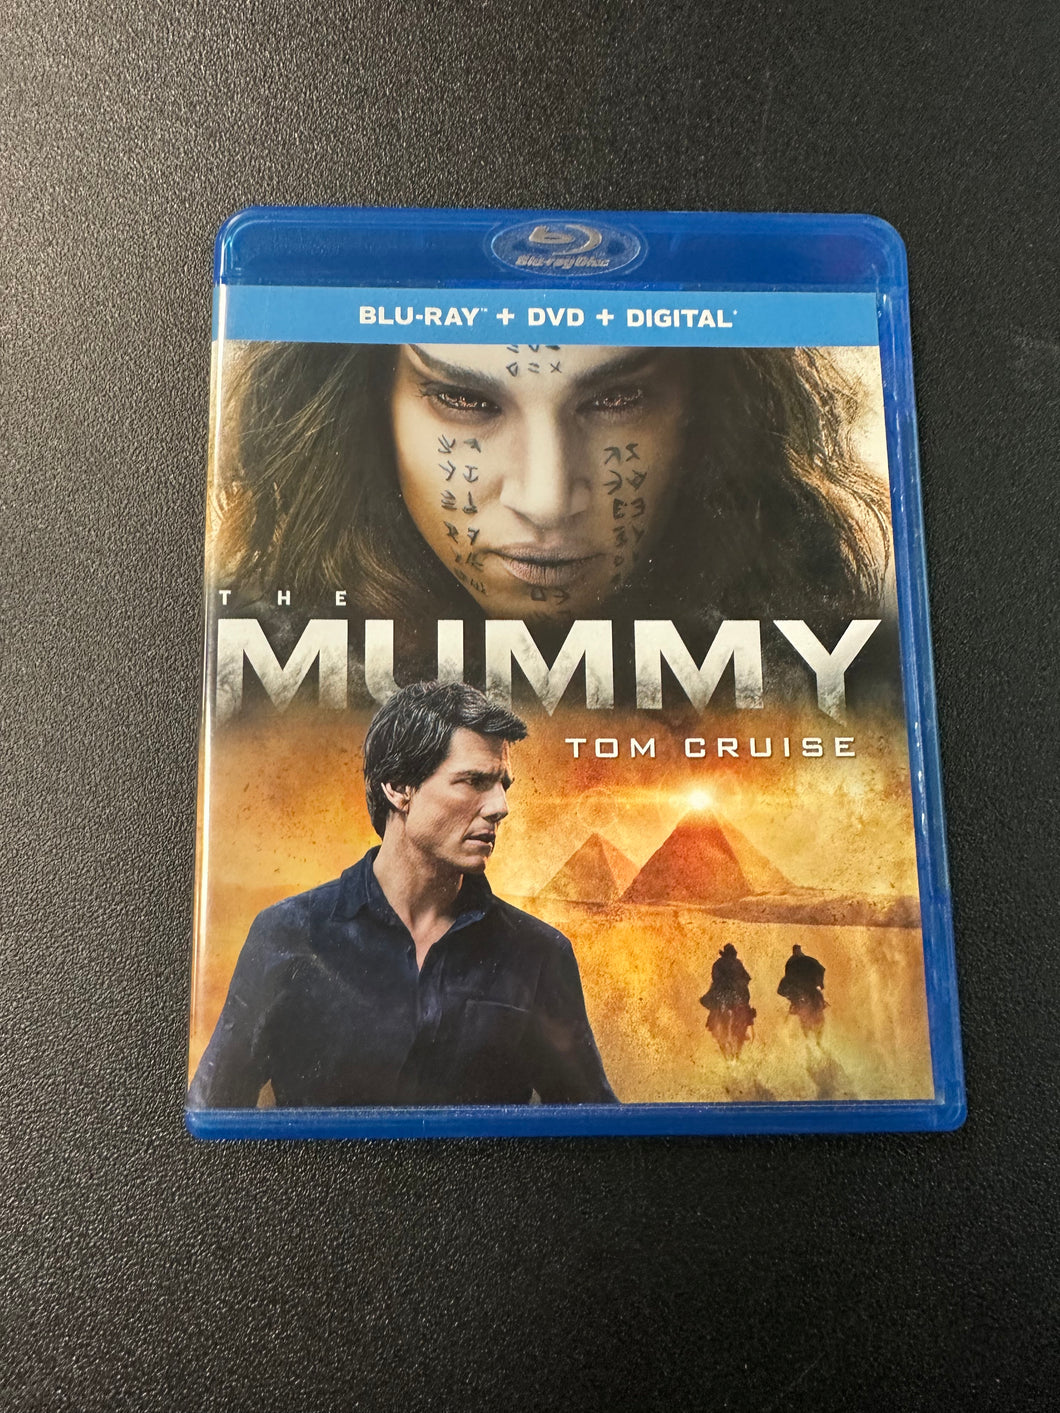 THE MUMMY TOM CRUISE [BluRay + DVD] PREOWNED